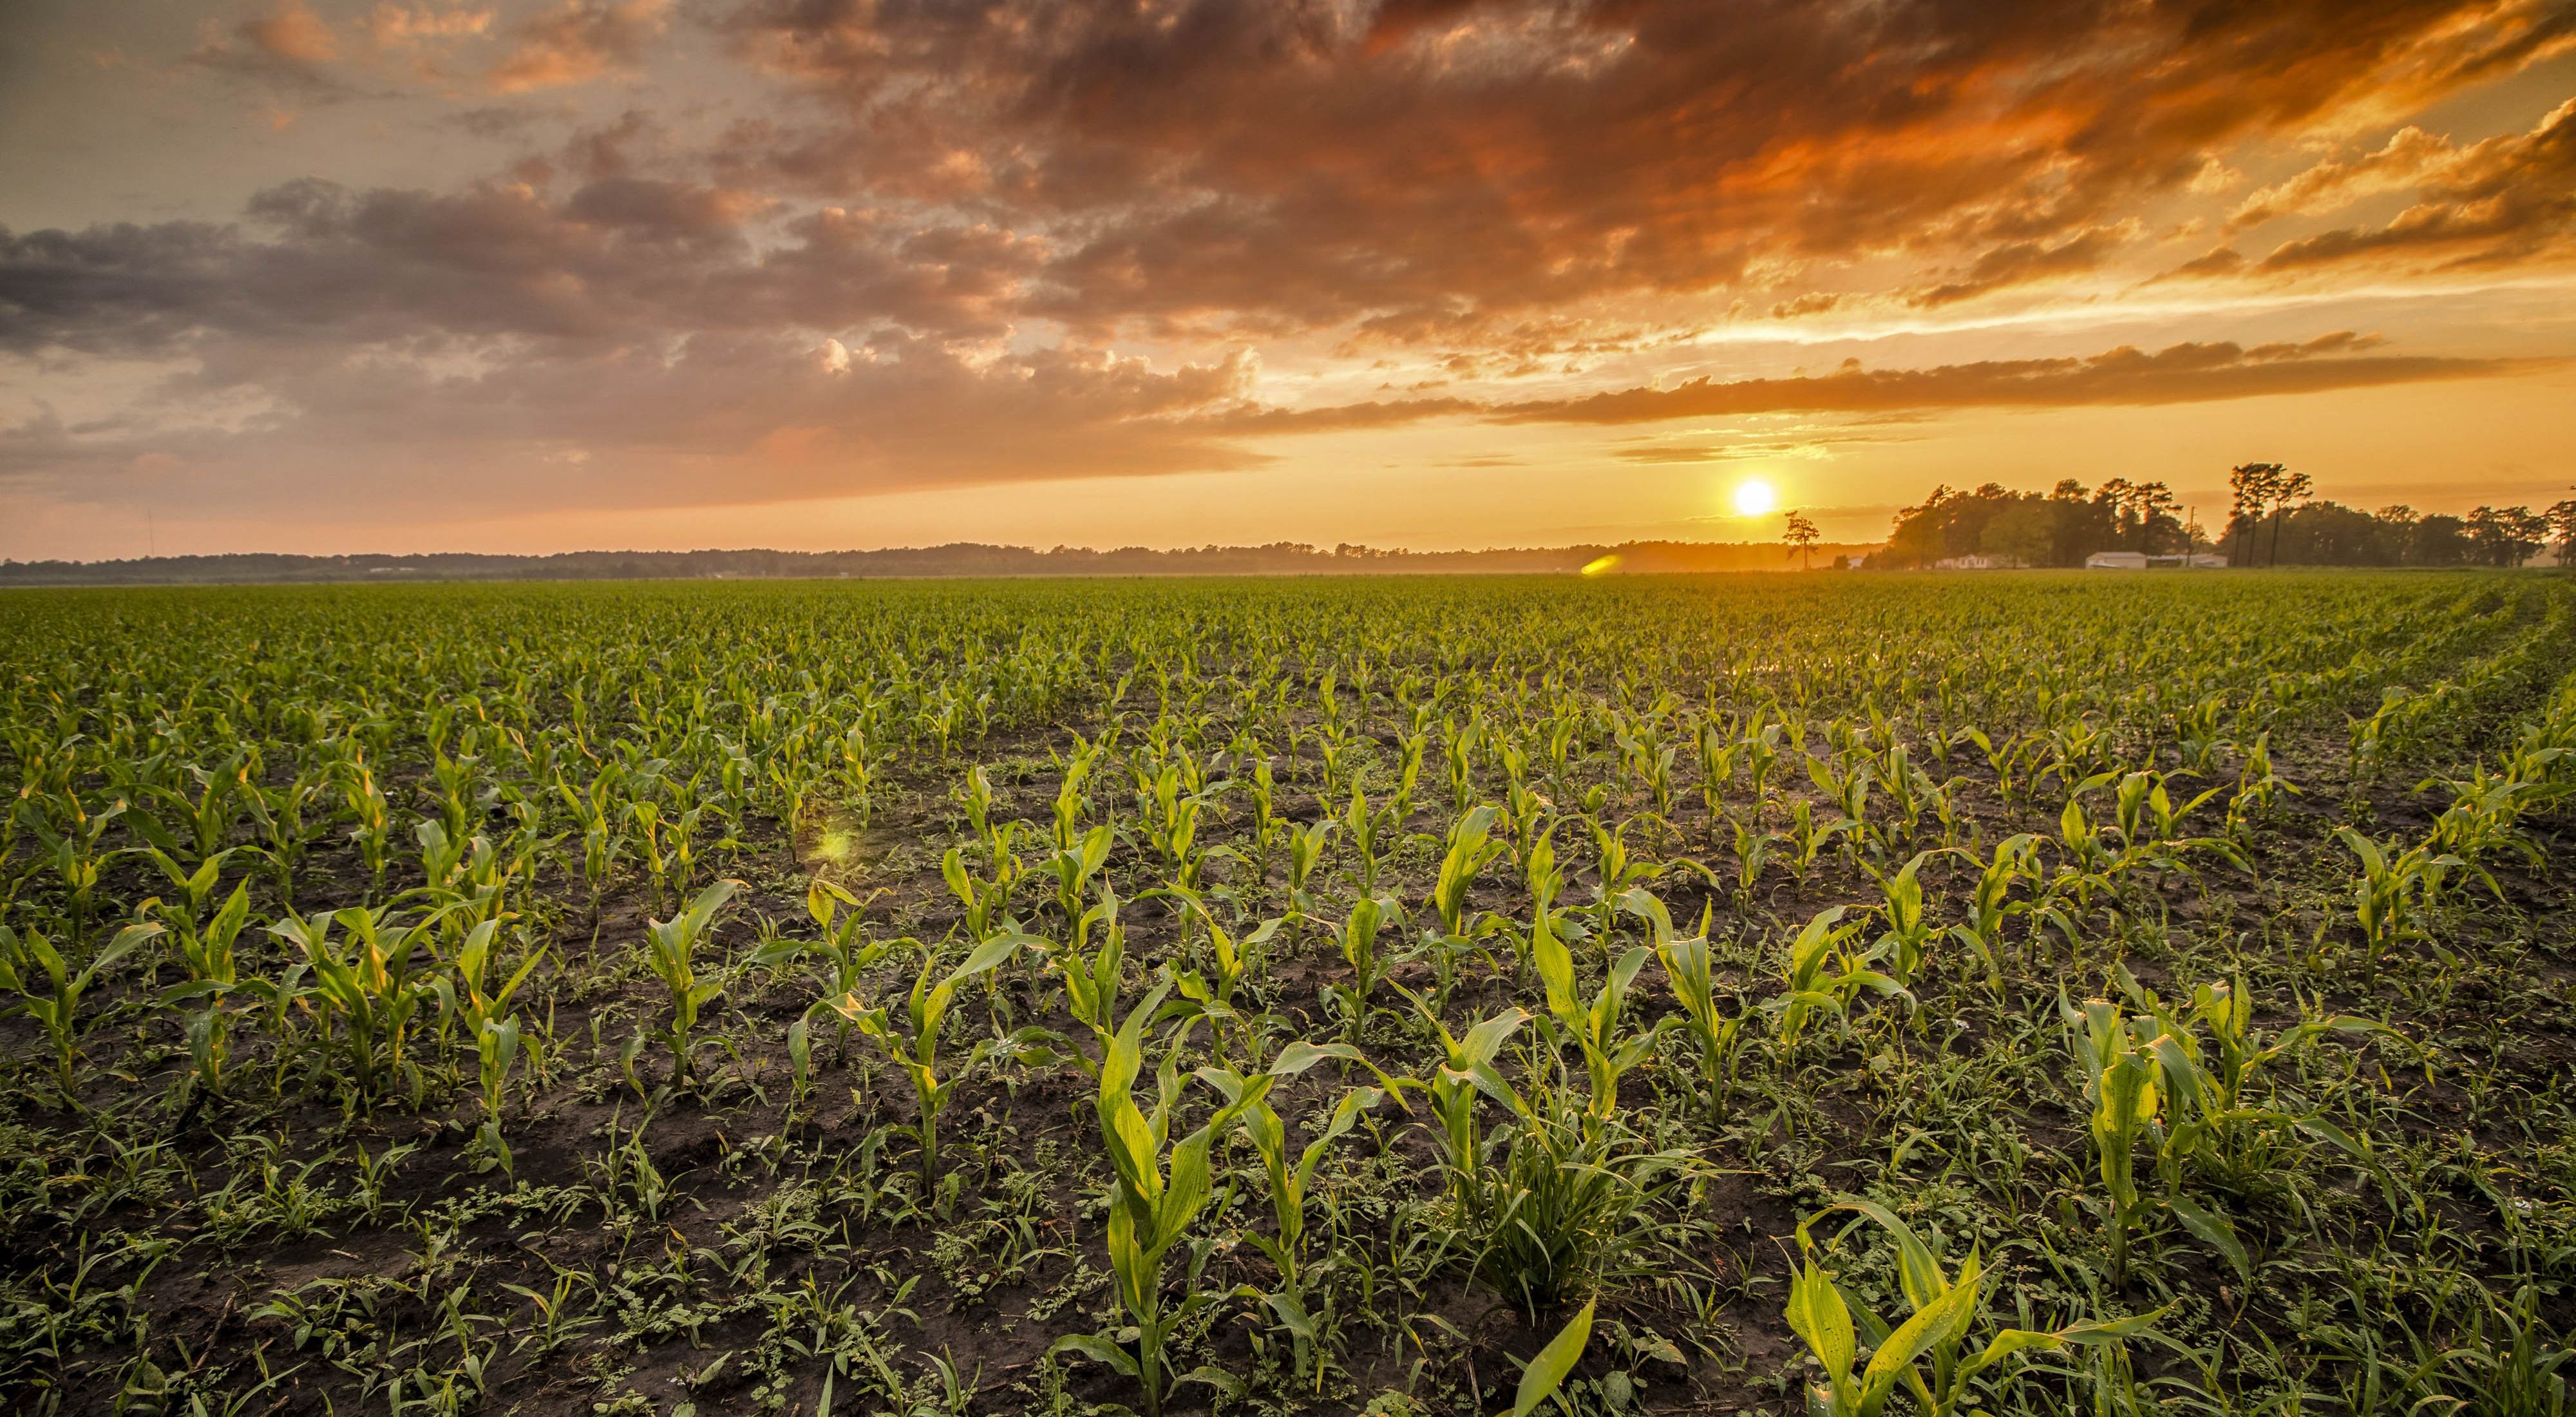 A wide expanse of corn plants a foot or two high under an orange sunset.